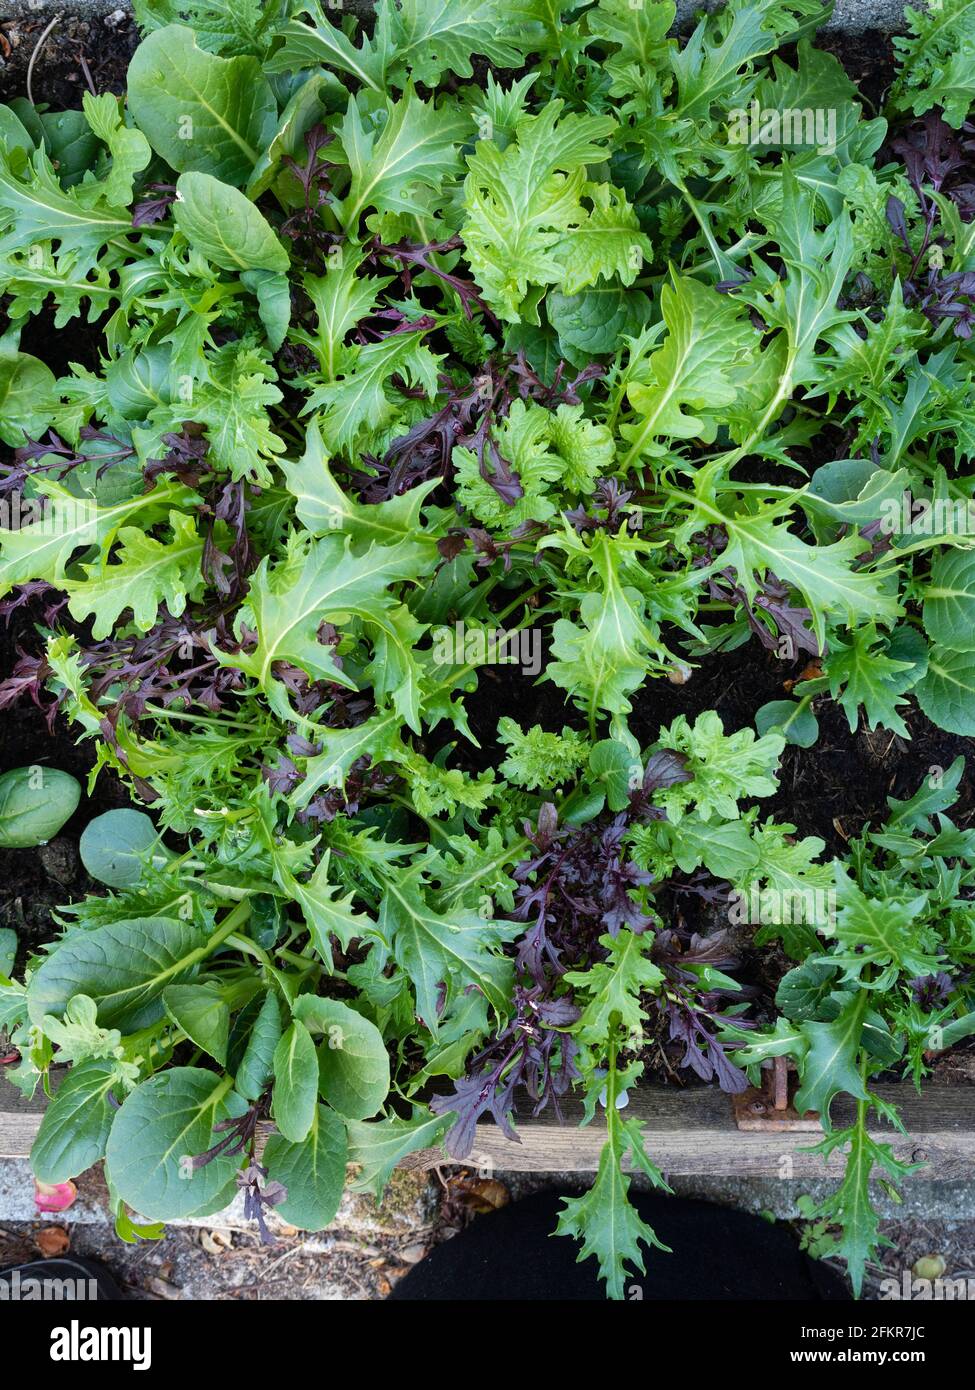 Mixed leaves of rocket, mizuna, pak choi and mustard growing in a small raised bed for 'cut and come again' salad cropping Stock Photo